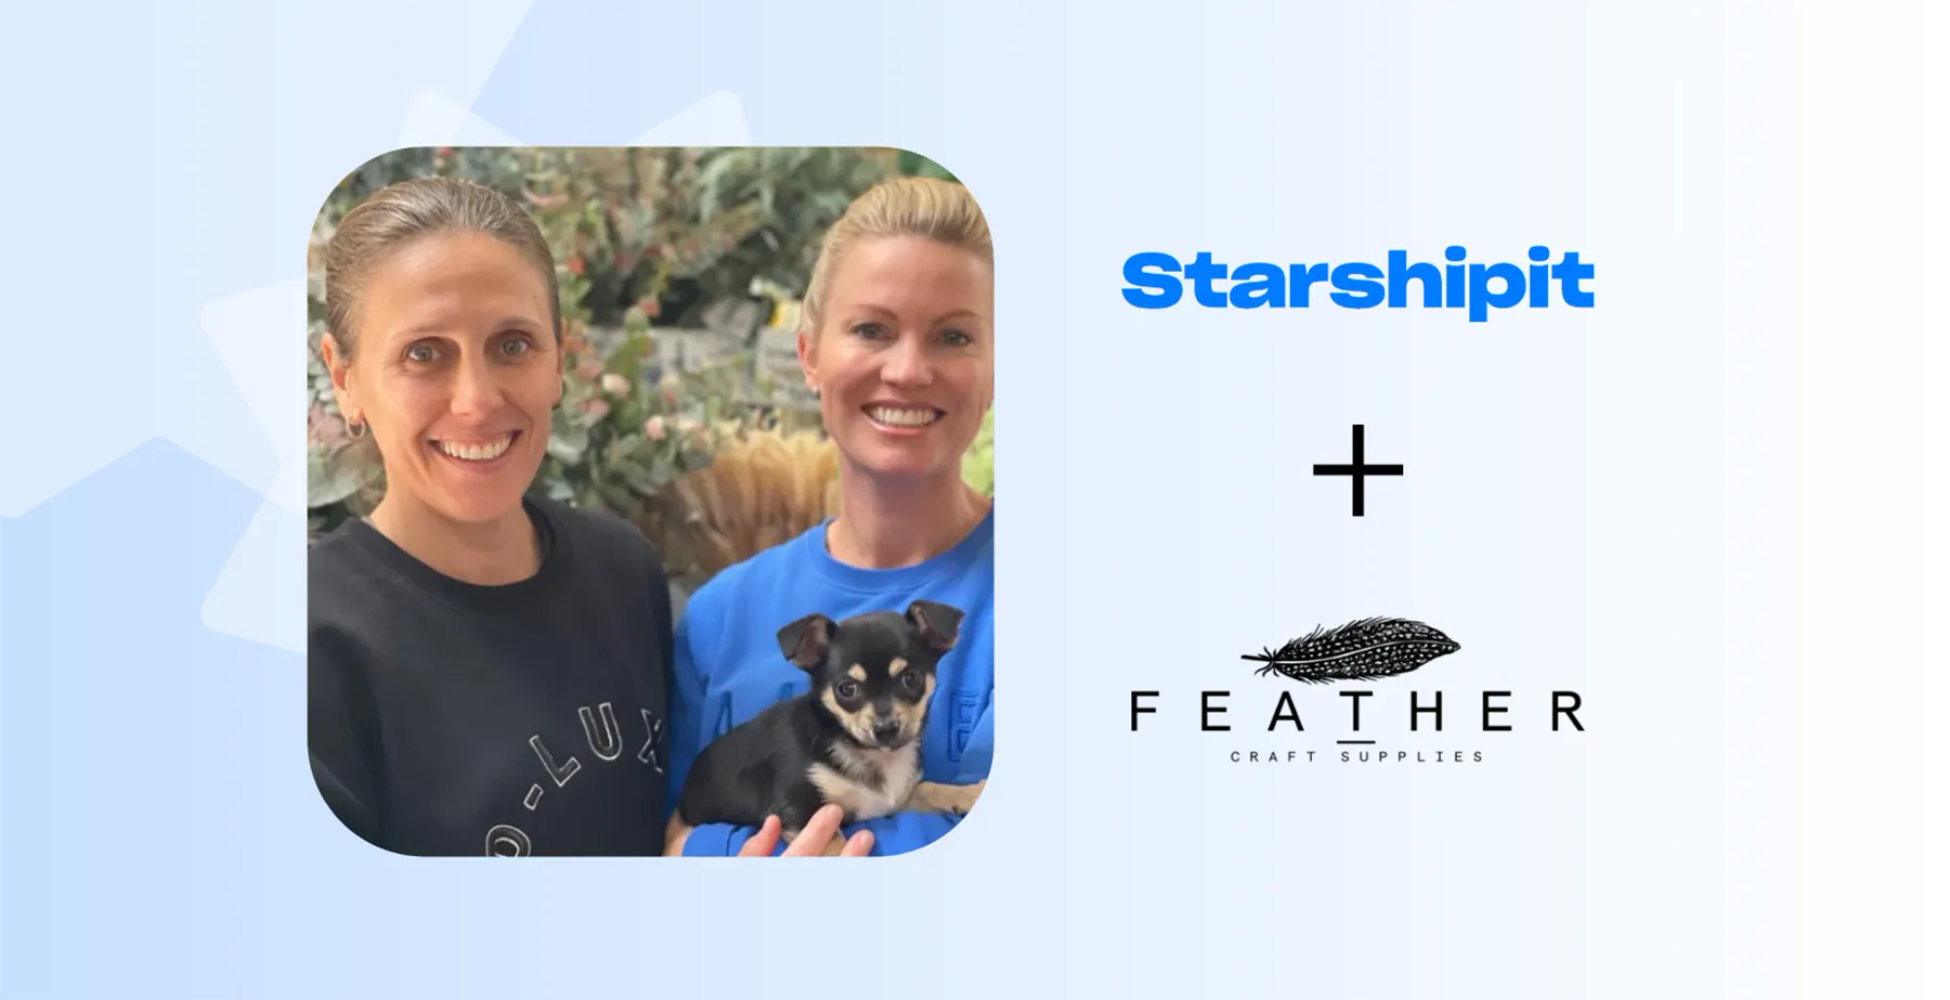 Starshipit and Feather case study